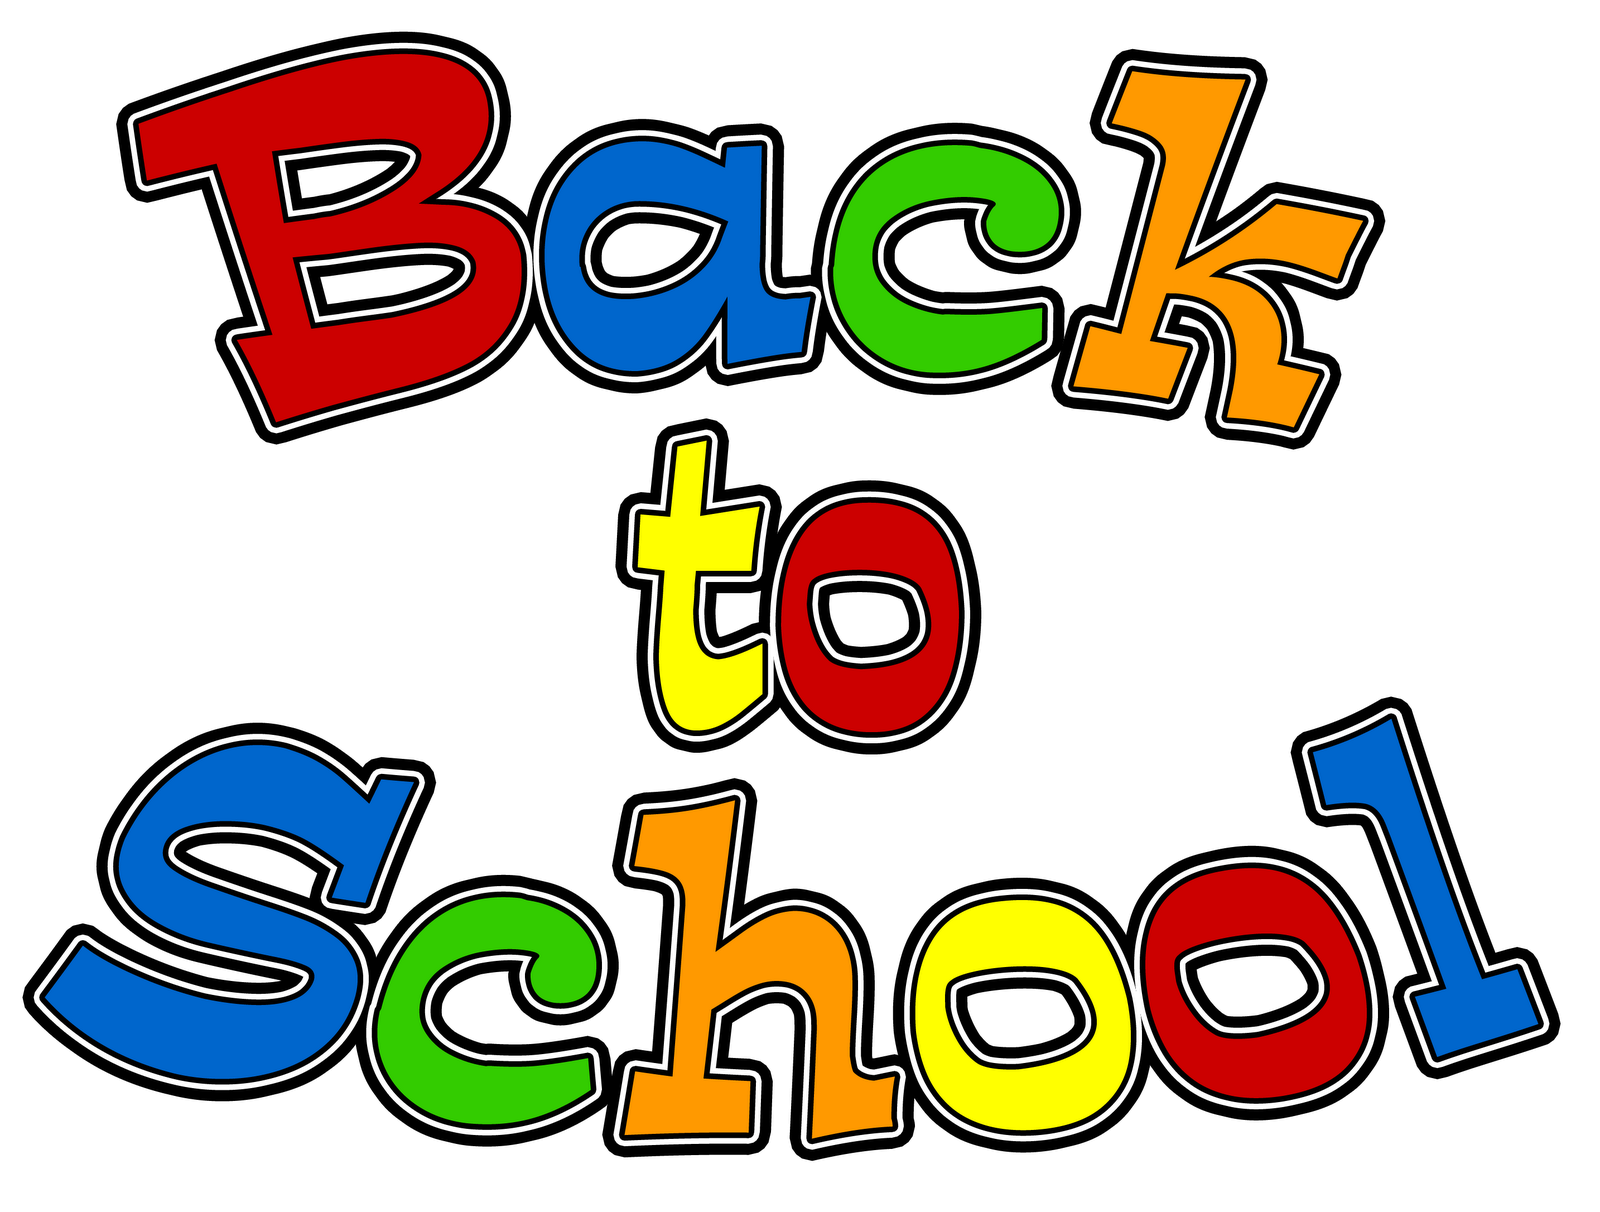 ... Back To School Images Free | Free Download Clip Art | Free Clip .